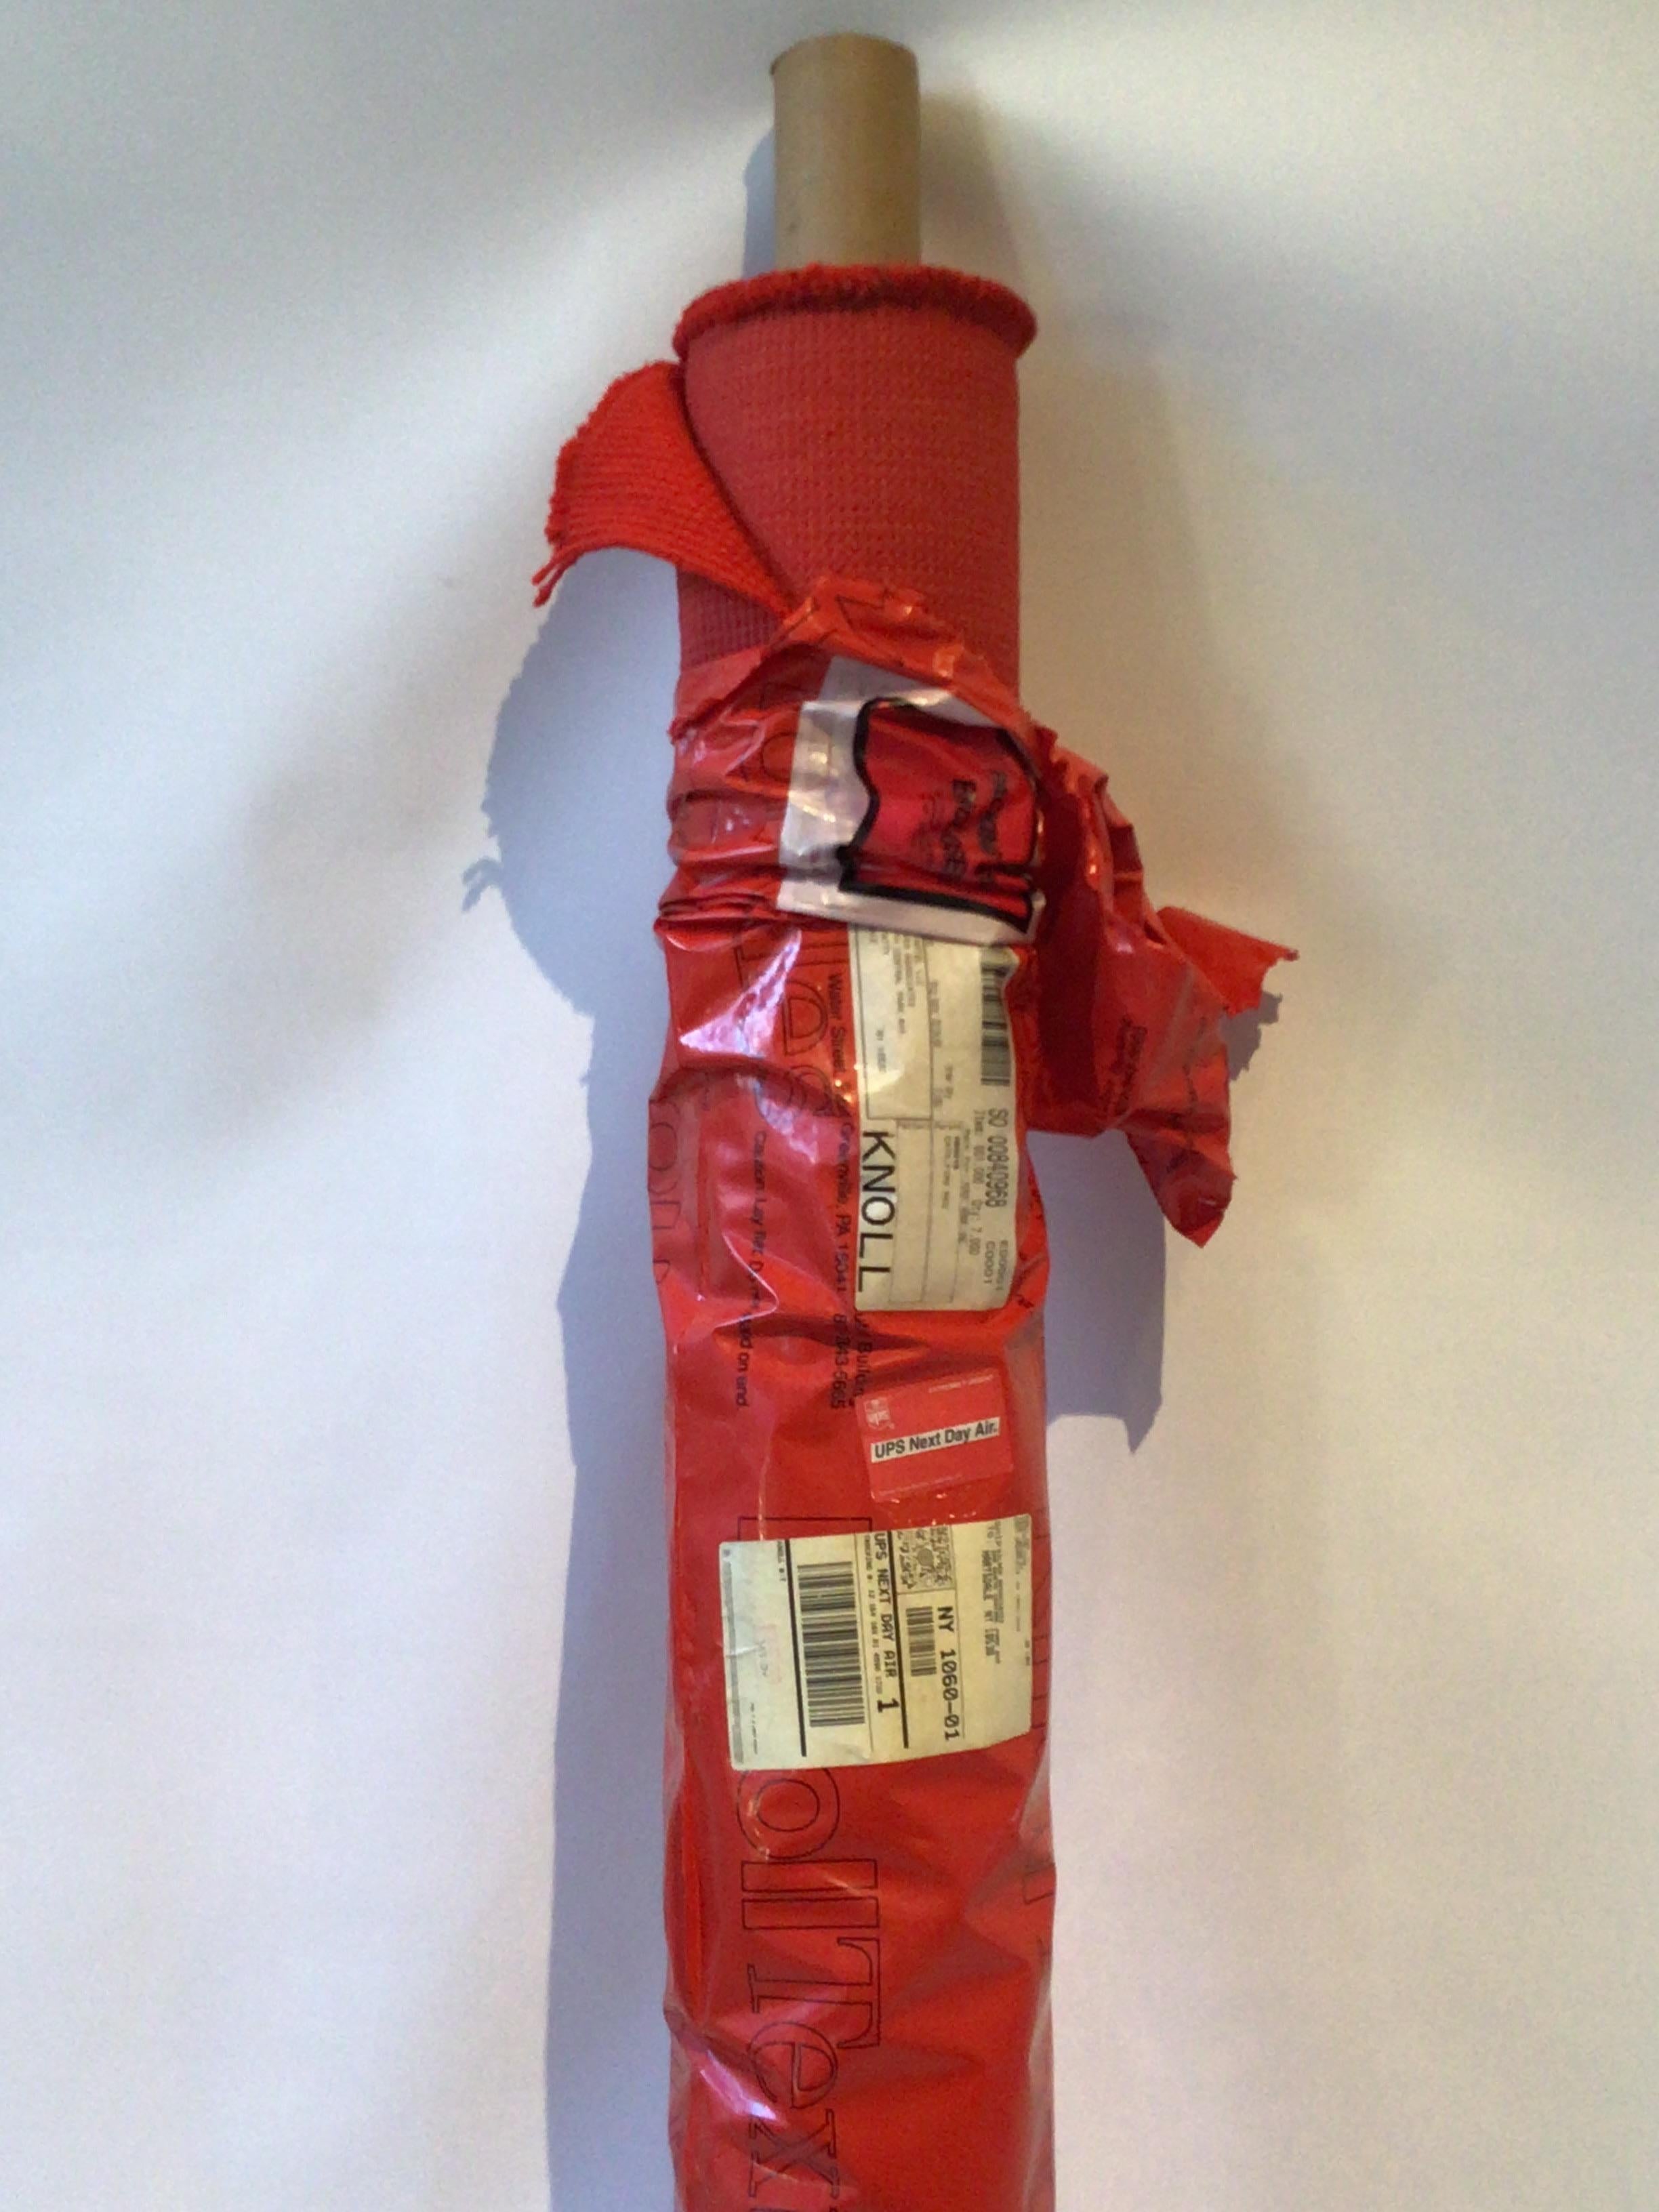 7 yards of unused Knoll Cato Fire Red fabric. Ordered in the year 2000.